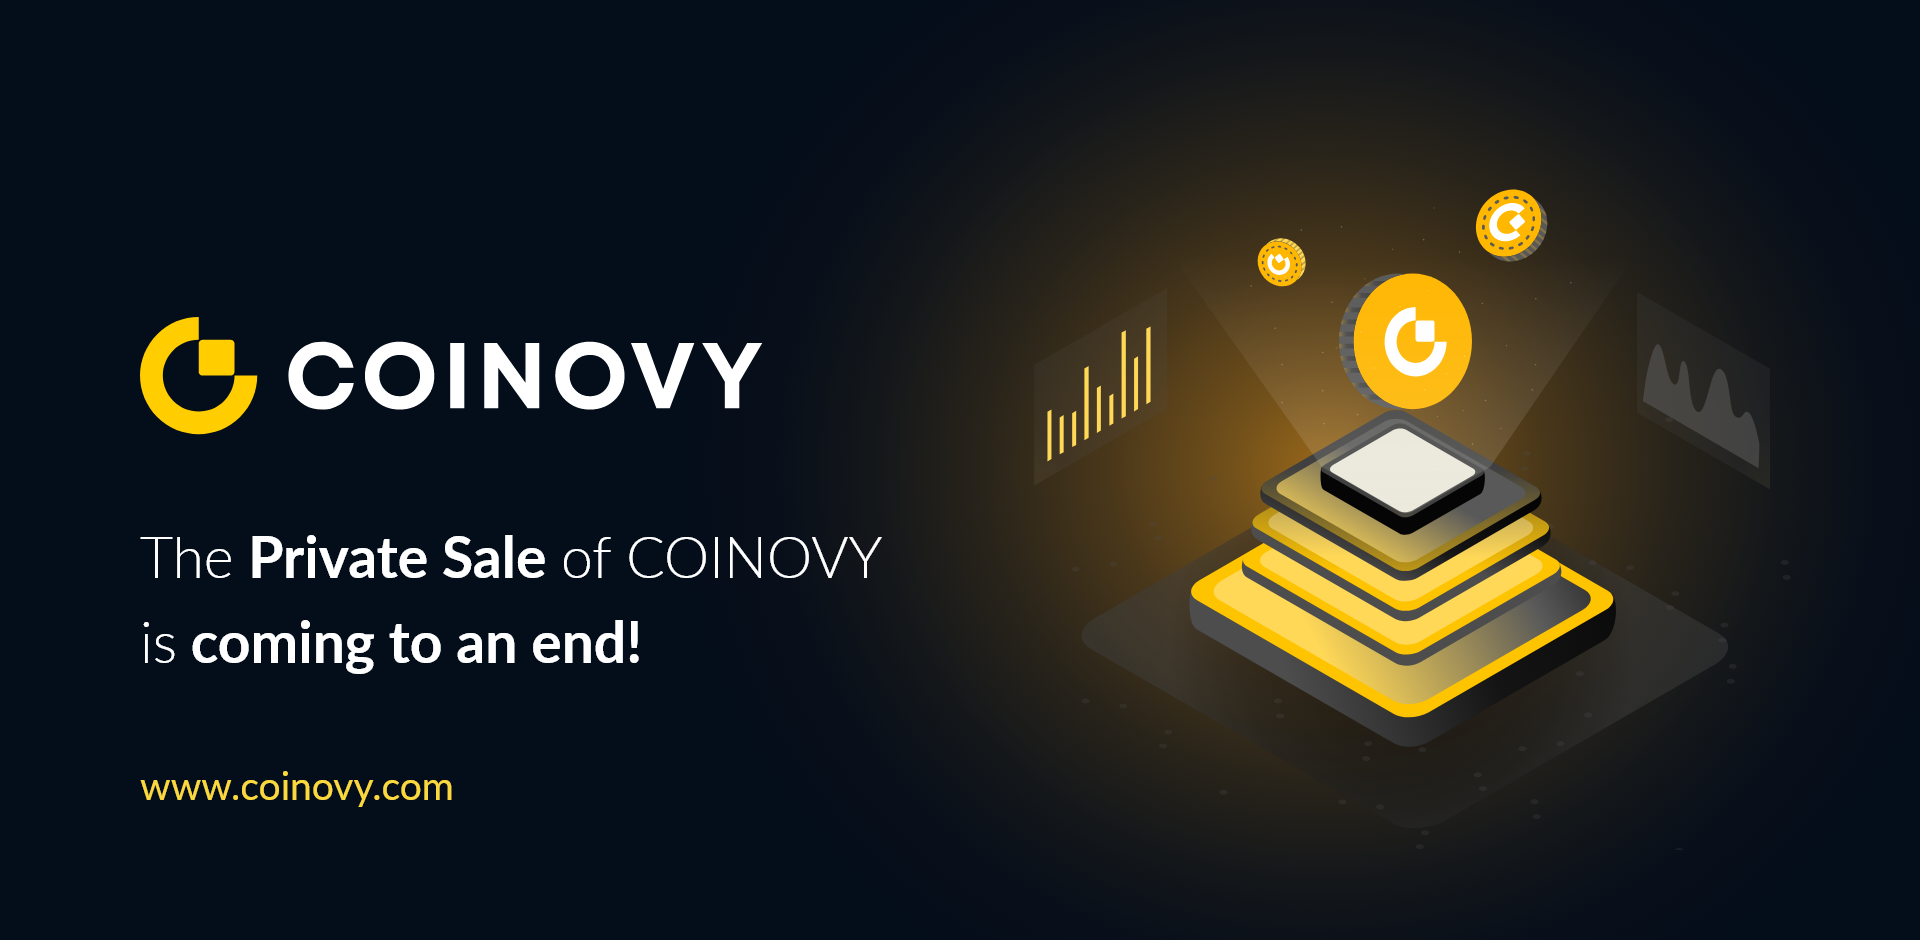 The Private Sale of COINOVY is Coming to an End